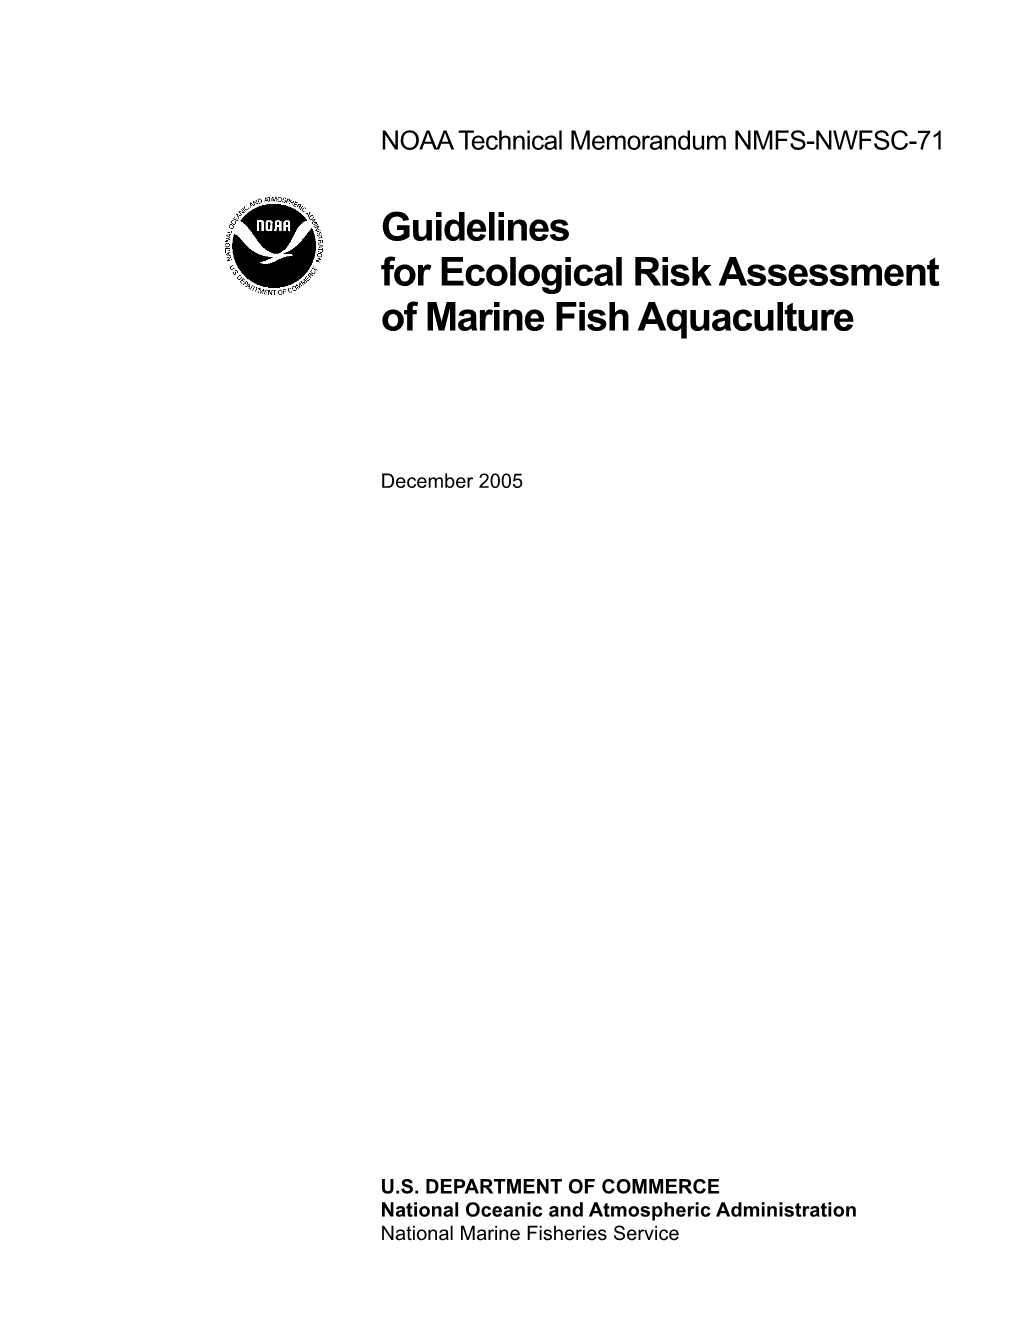 Guidelines for Ecological Risk Assessment of Marine Fish Aquaculture